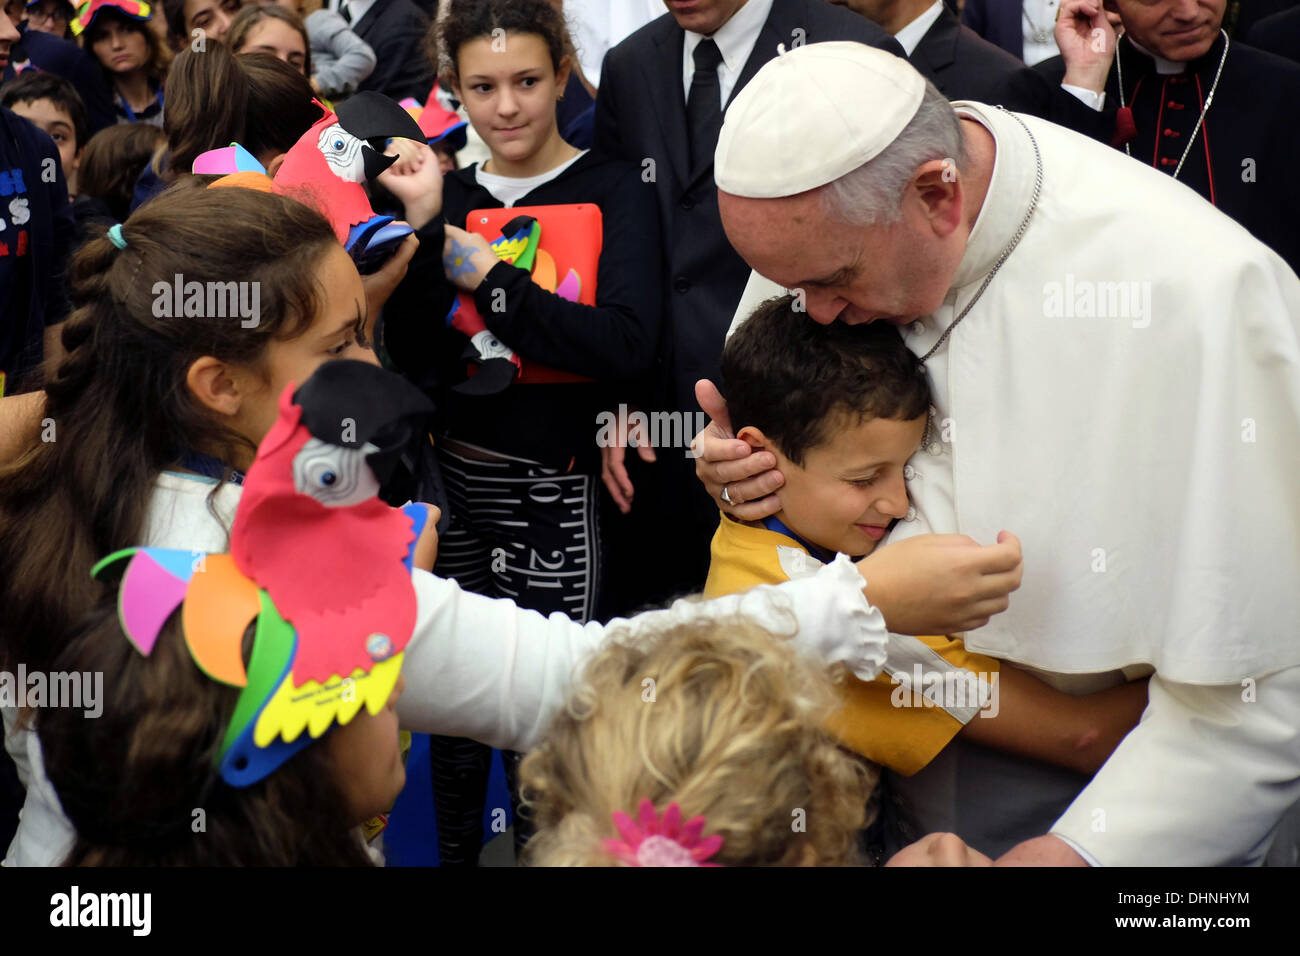 Rome, Italy. 9th November 2013. Rome meeting UNITALSI( Italian National Union for Transporting the Sick to Lourdes and International Shrines )   Pope Francis meet about 1000 sick people for the 110 years of UNITALSI 09 Nov 2013 © Realy Easy Star/Alamy Live News Stock Photo